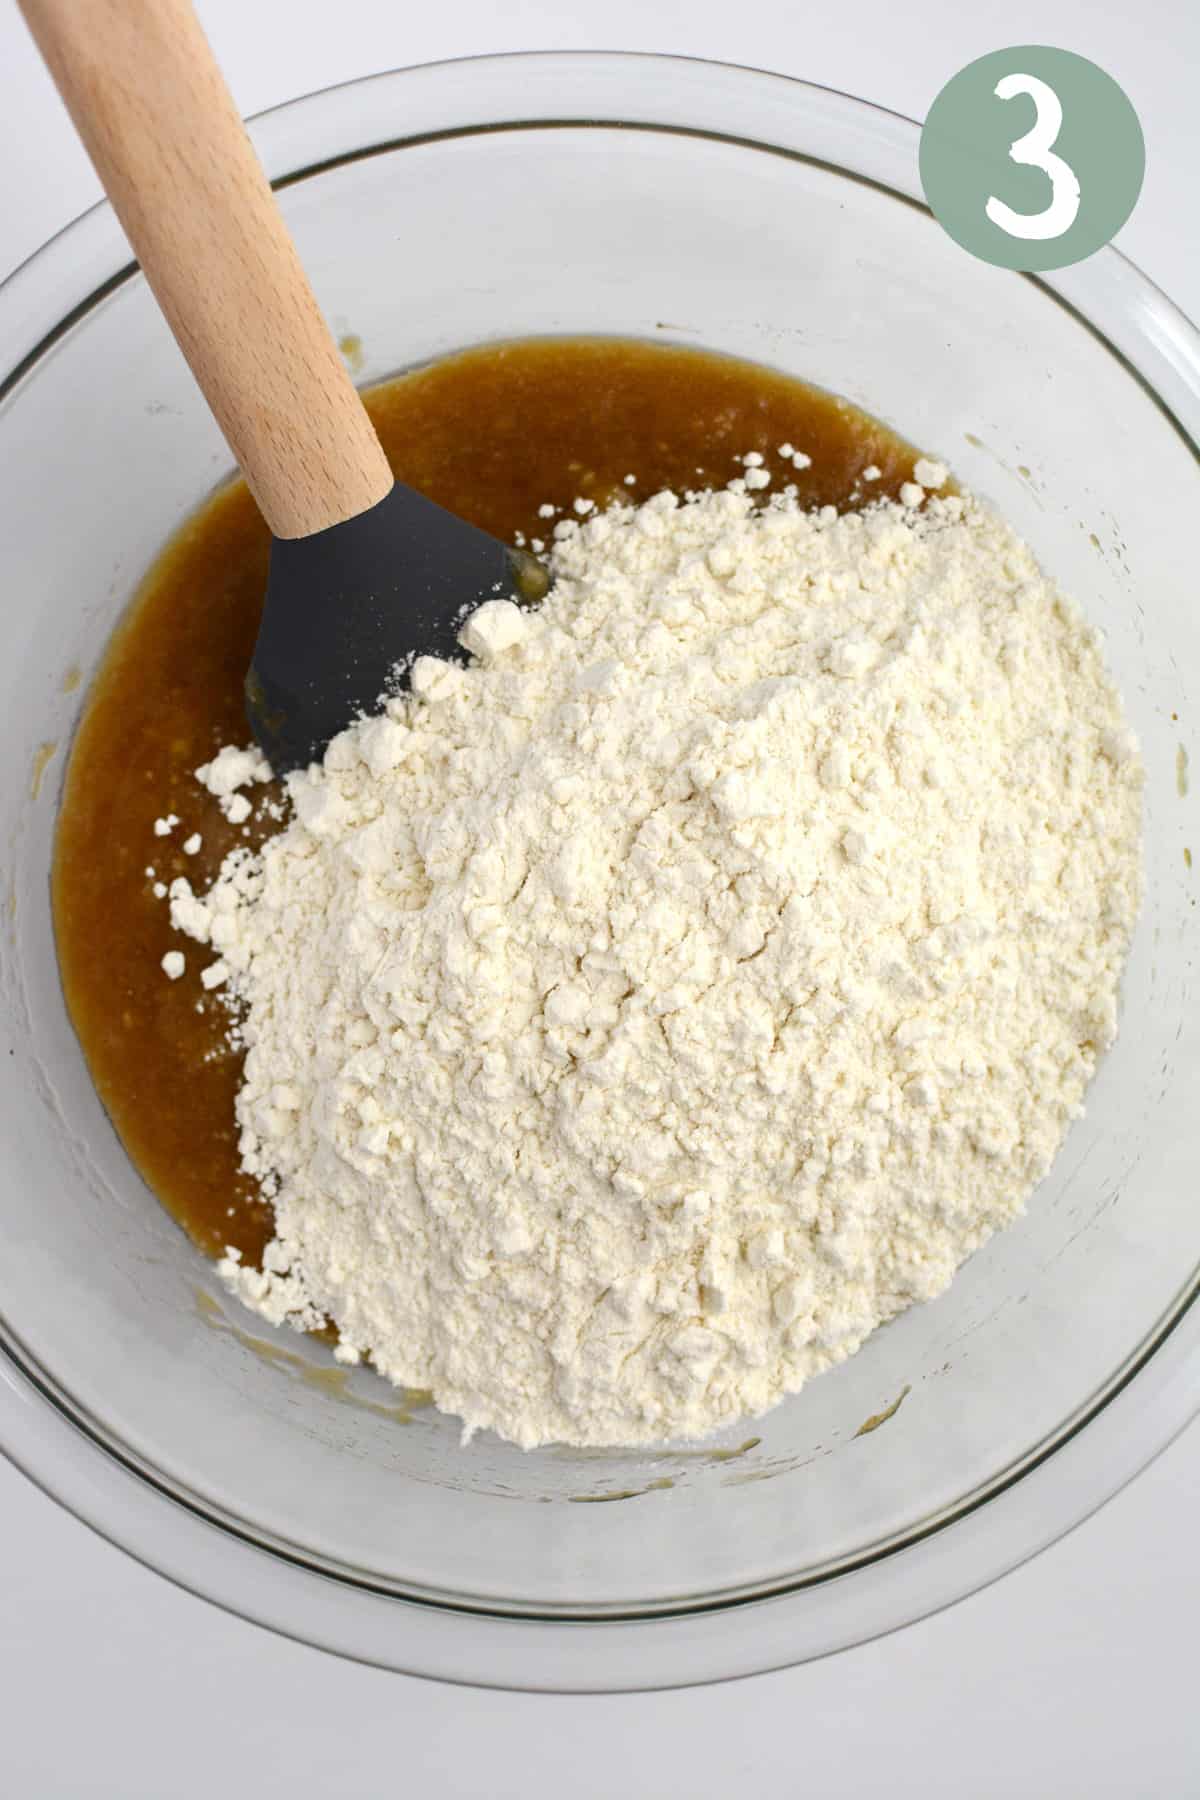 A glass bowl with mashed bananas, coconut oil, and coconut sugar mixed together and flour added on top.